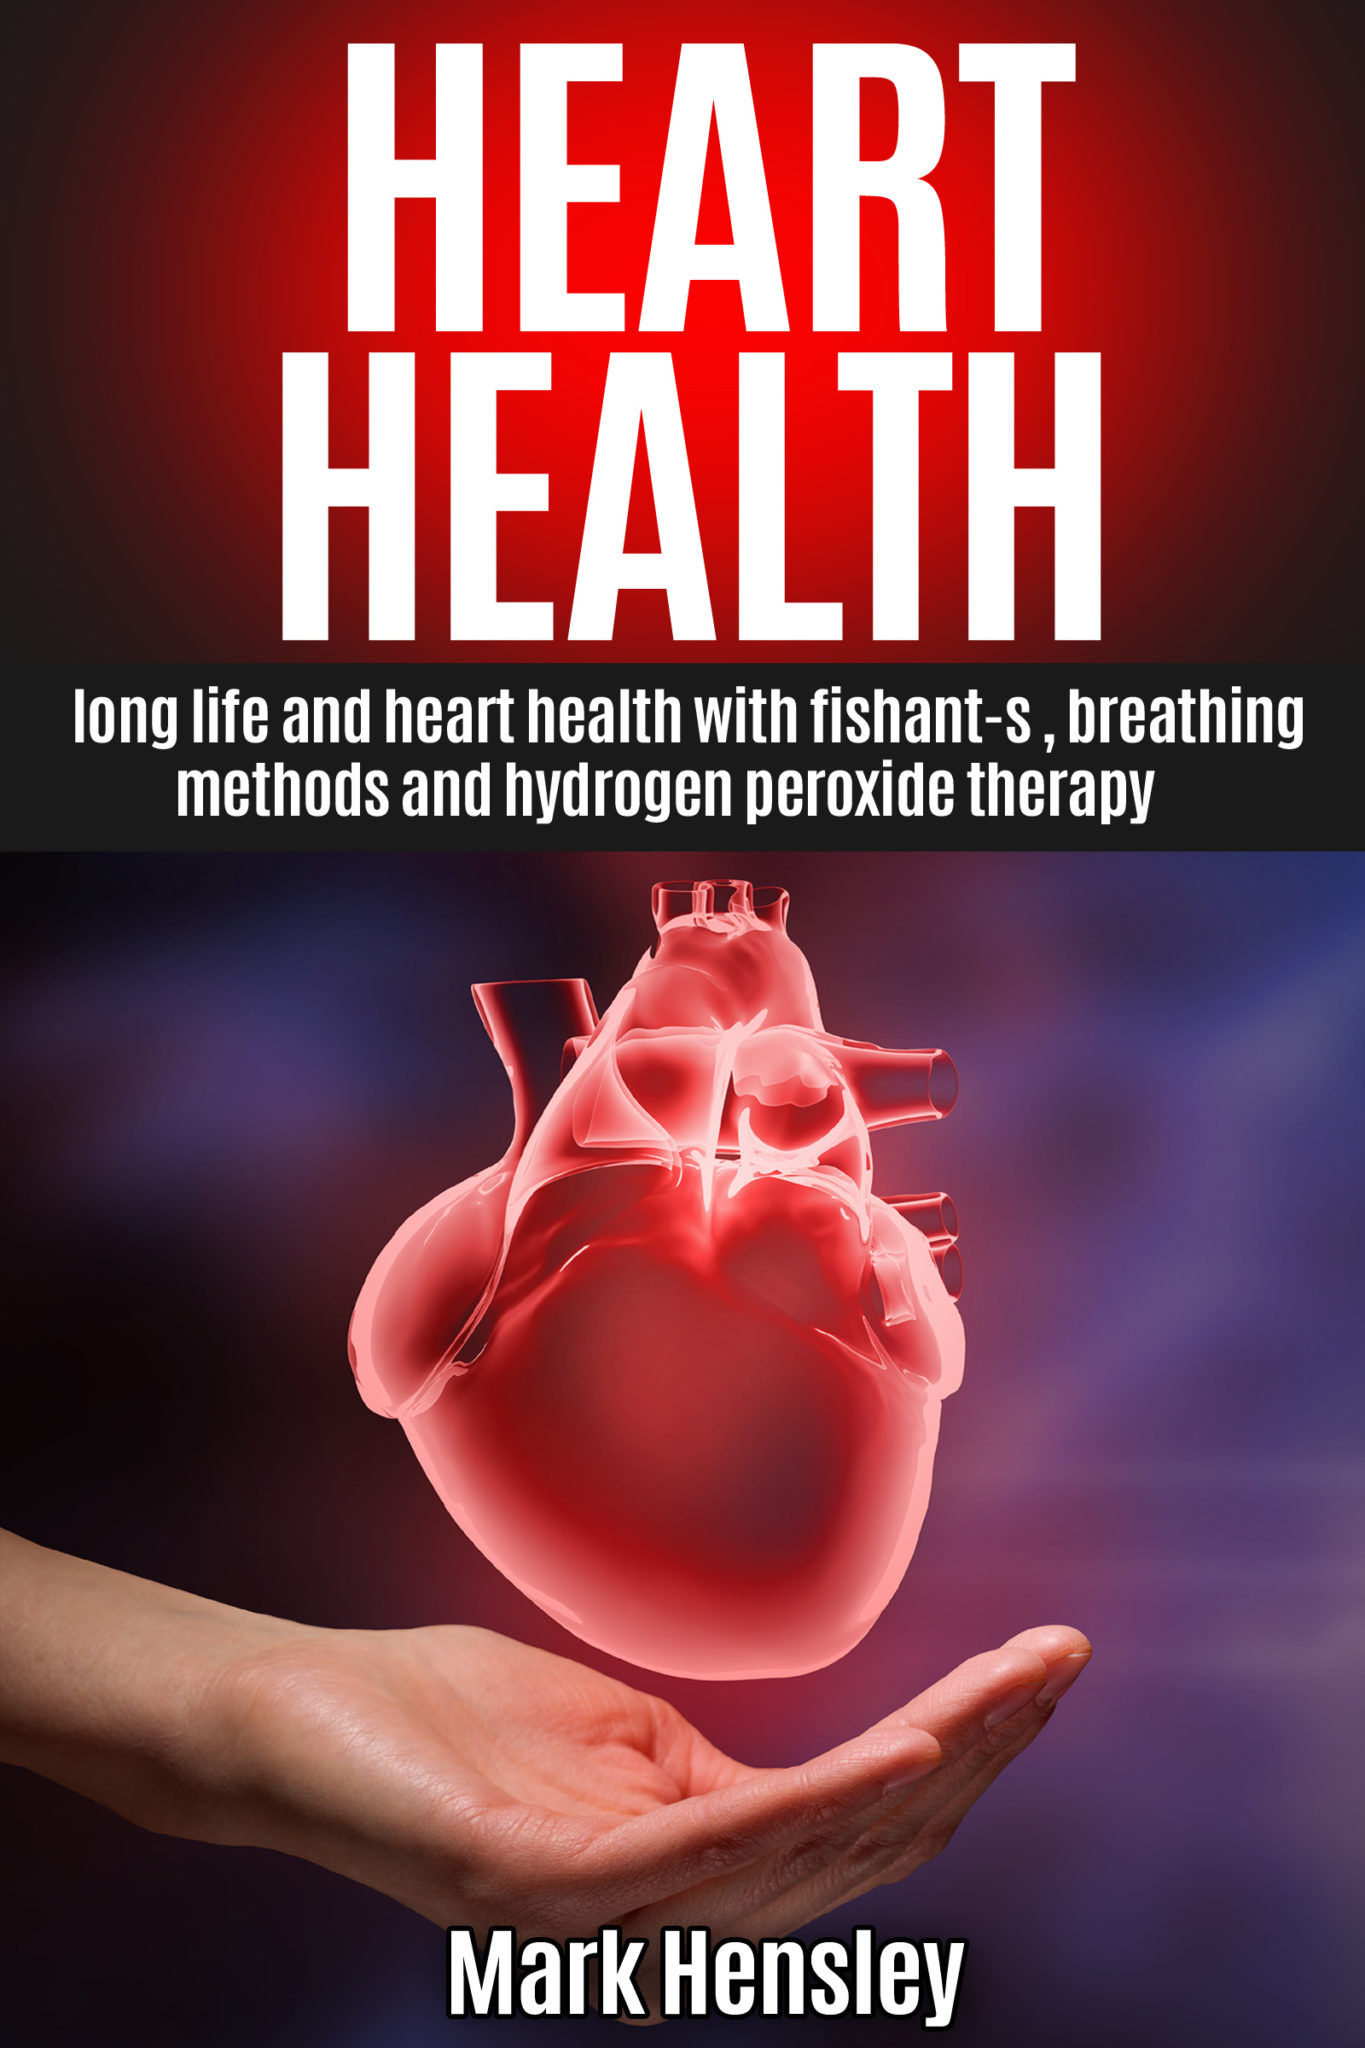 FREE: HEART HEALTH: Long Life and Heart Health with FISHant-C®, Breathing Methods and Hydrogen Peroxide Therapy by Mark Hensley